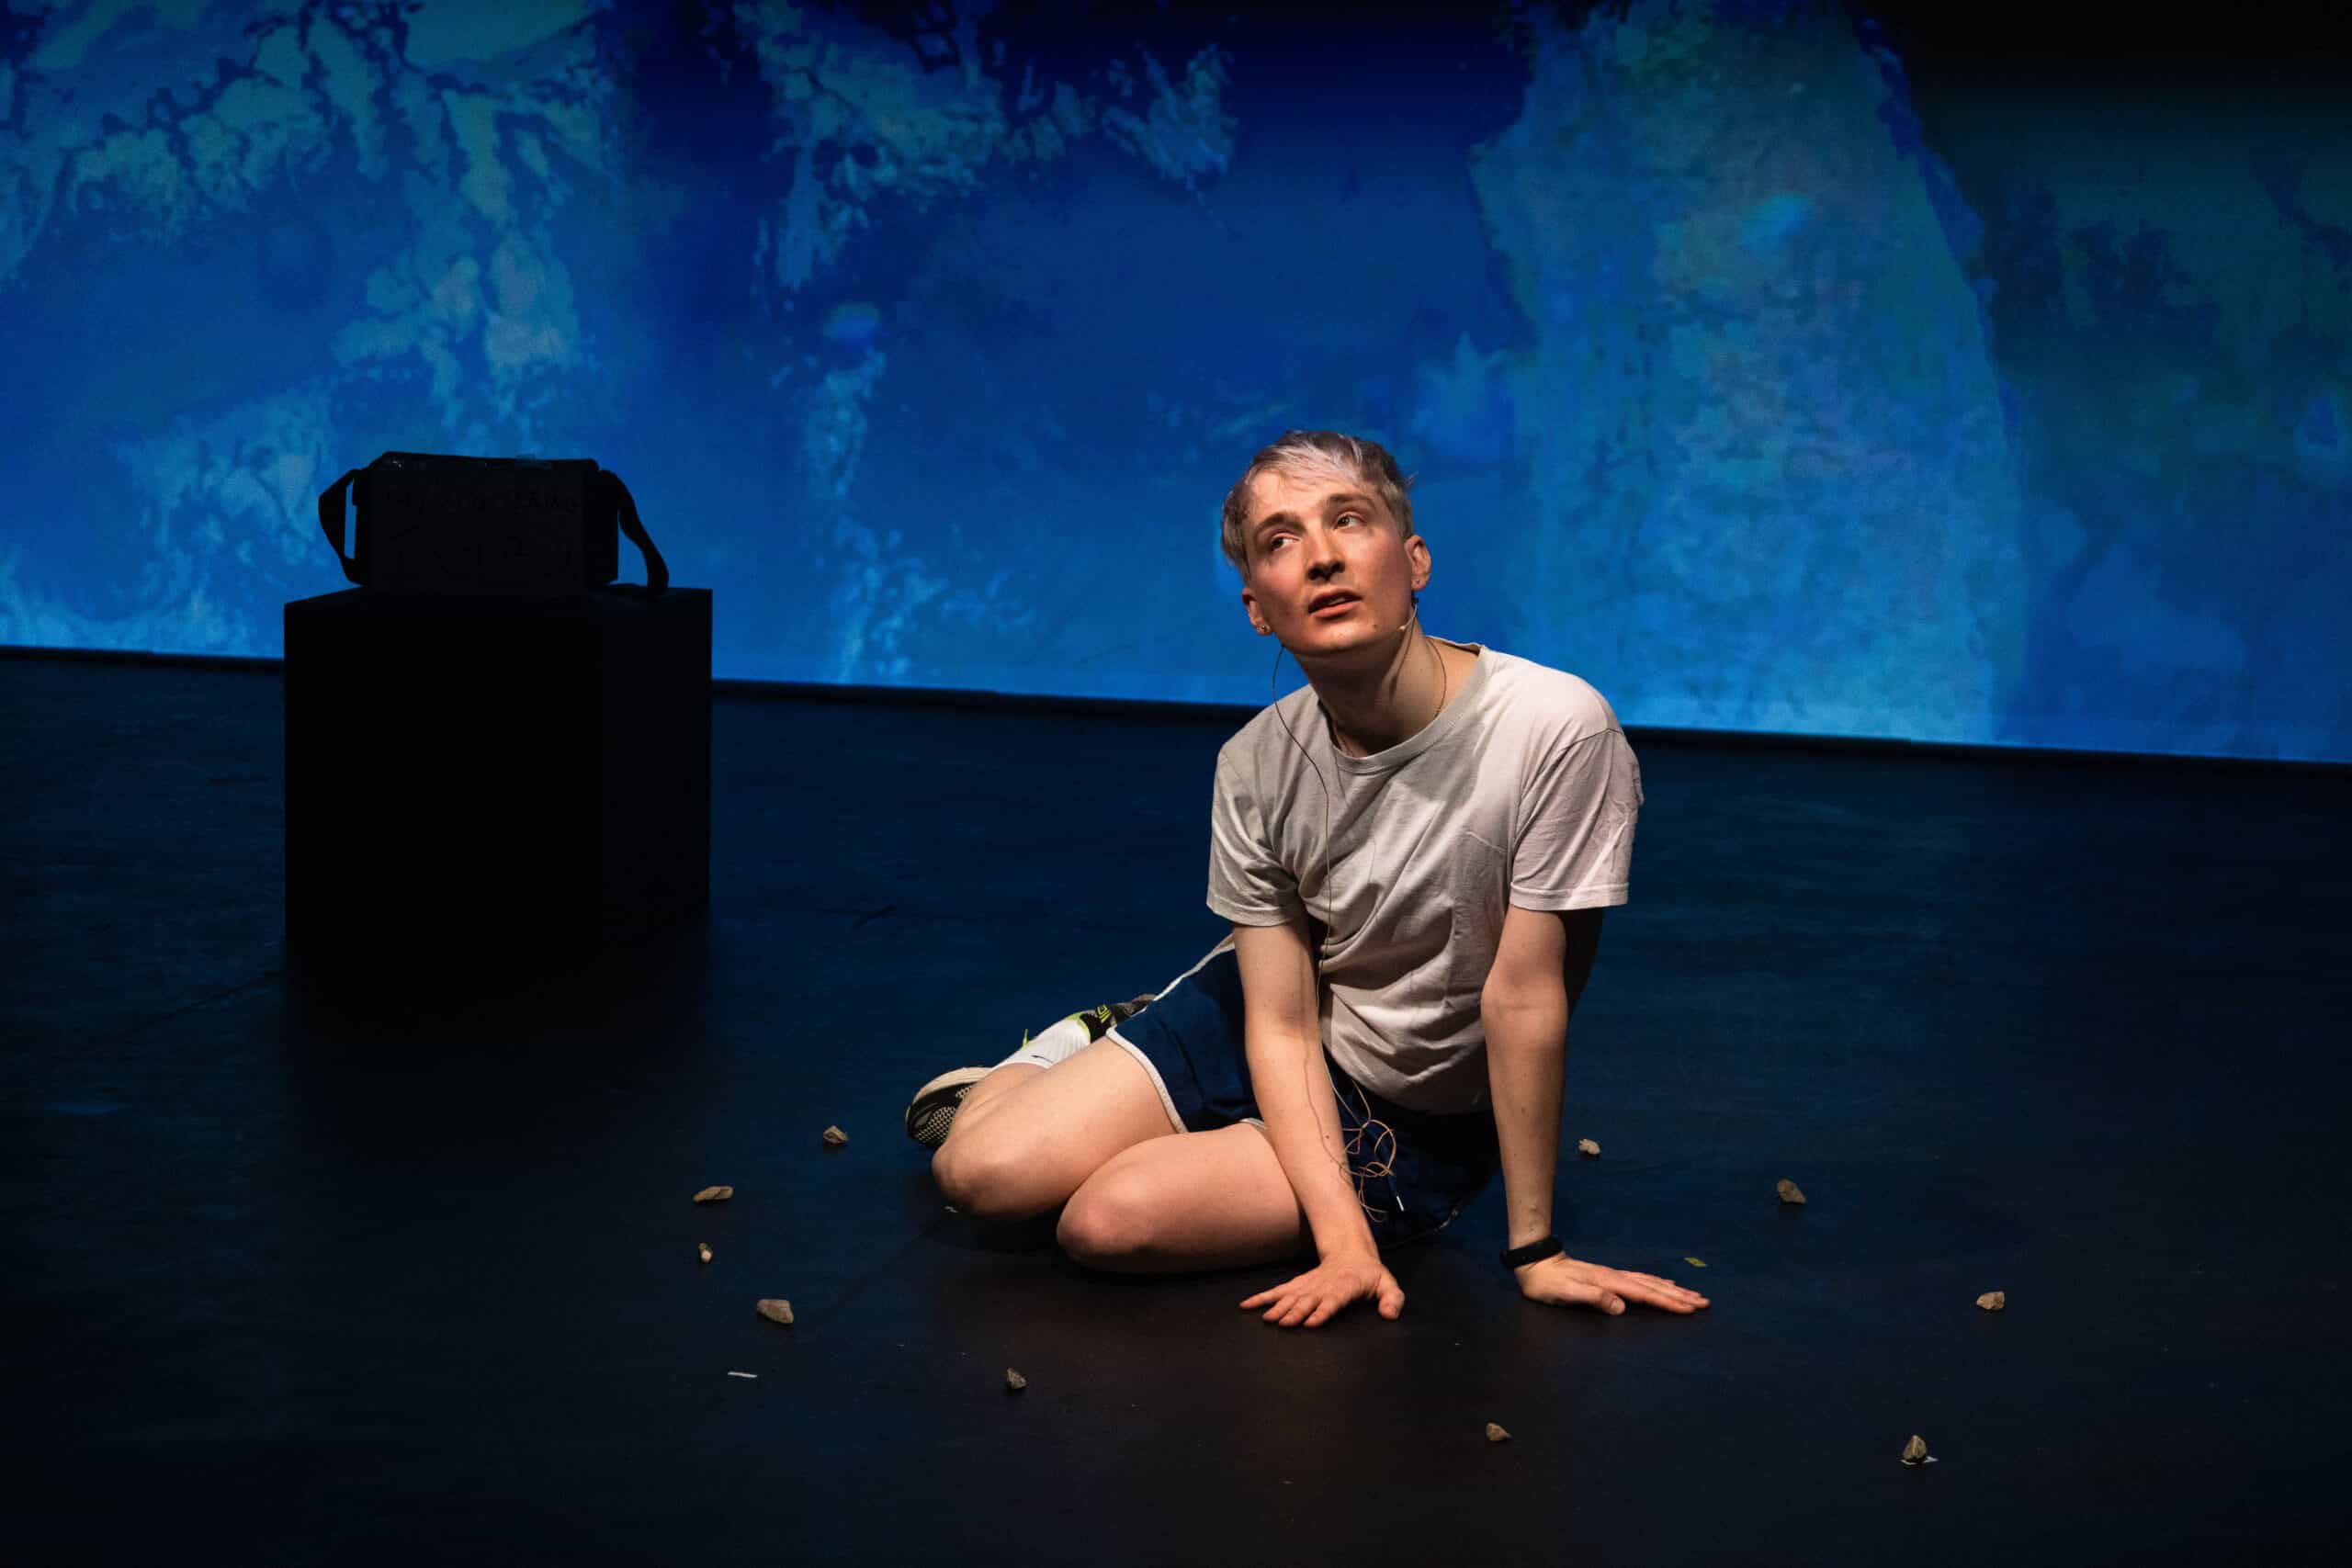 Oli - a white non-binary person - has bleached hair and is dressed in a white tshirt and blue gym shorts. Oli sits on stage, with a blue-washed projection behind them. They have a focused expression and their mouth is slightly open.